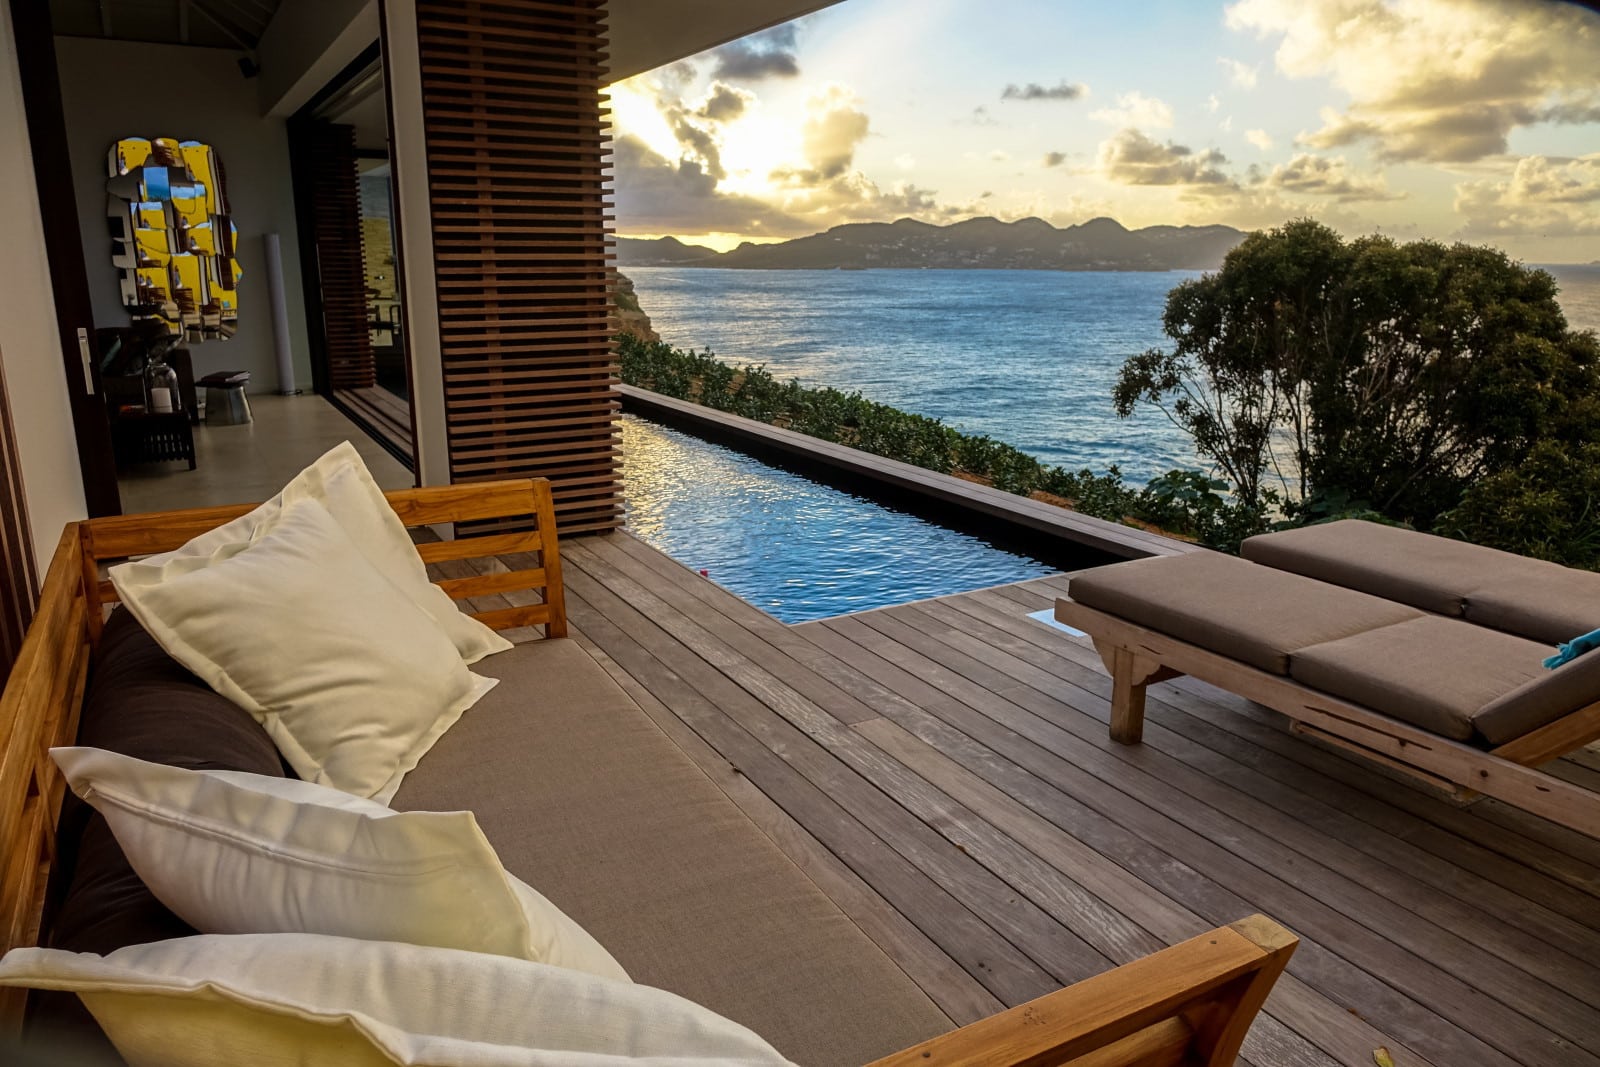 Romantic sunset view in the pool and sundeck of my villa BelAmour, St. Barths